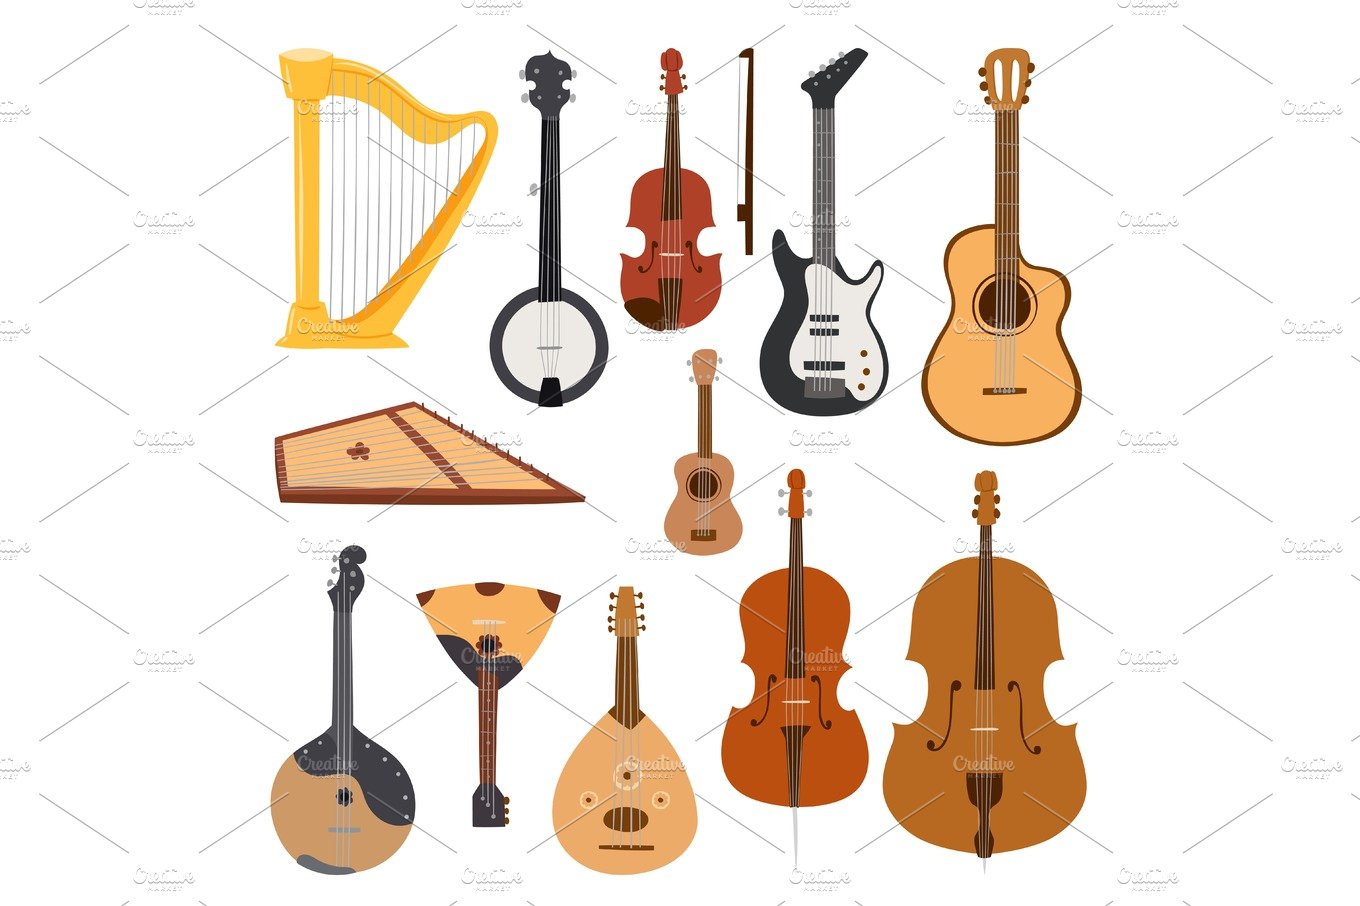 Stringed musical instruments classical orchestra tool equipment vector illu... cover image.